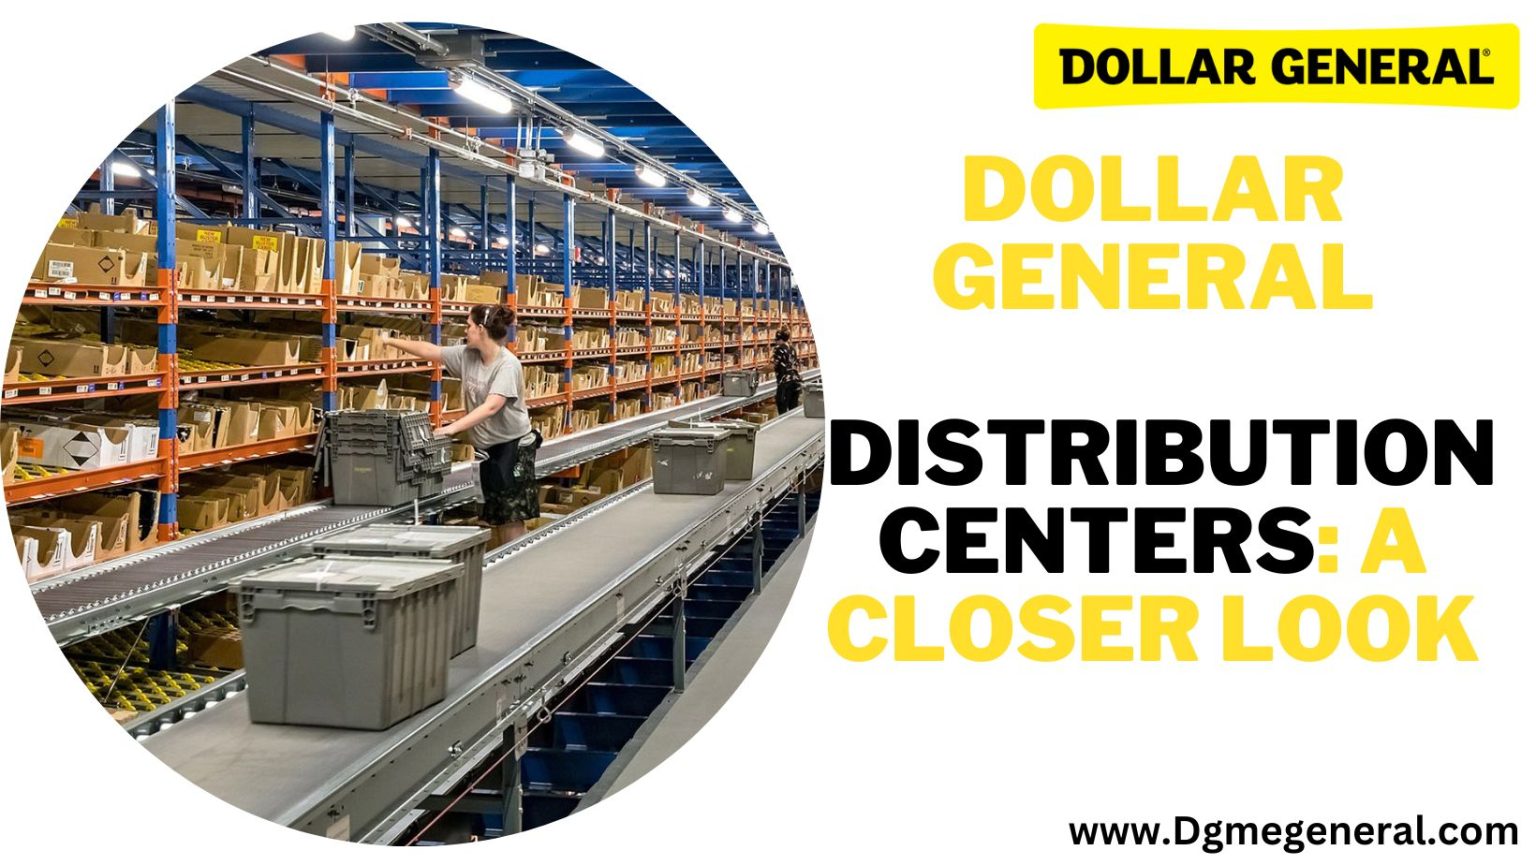 Dollar General Distribution Centers A Closer Look